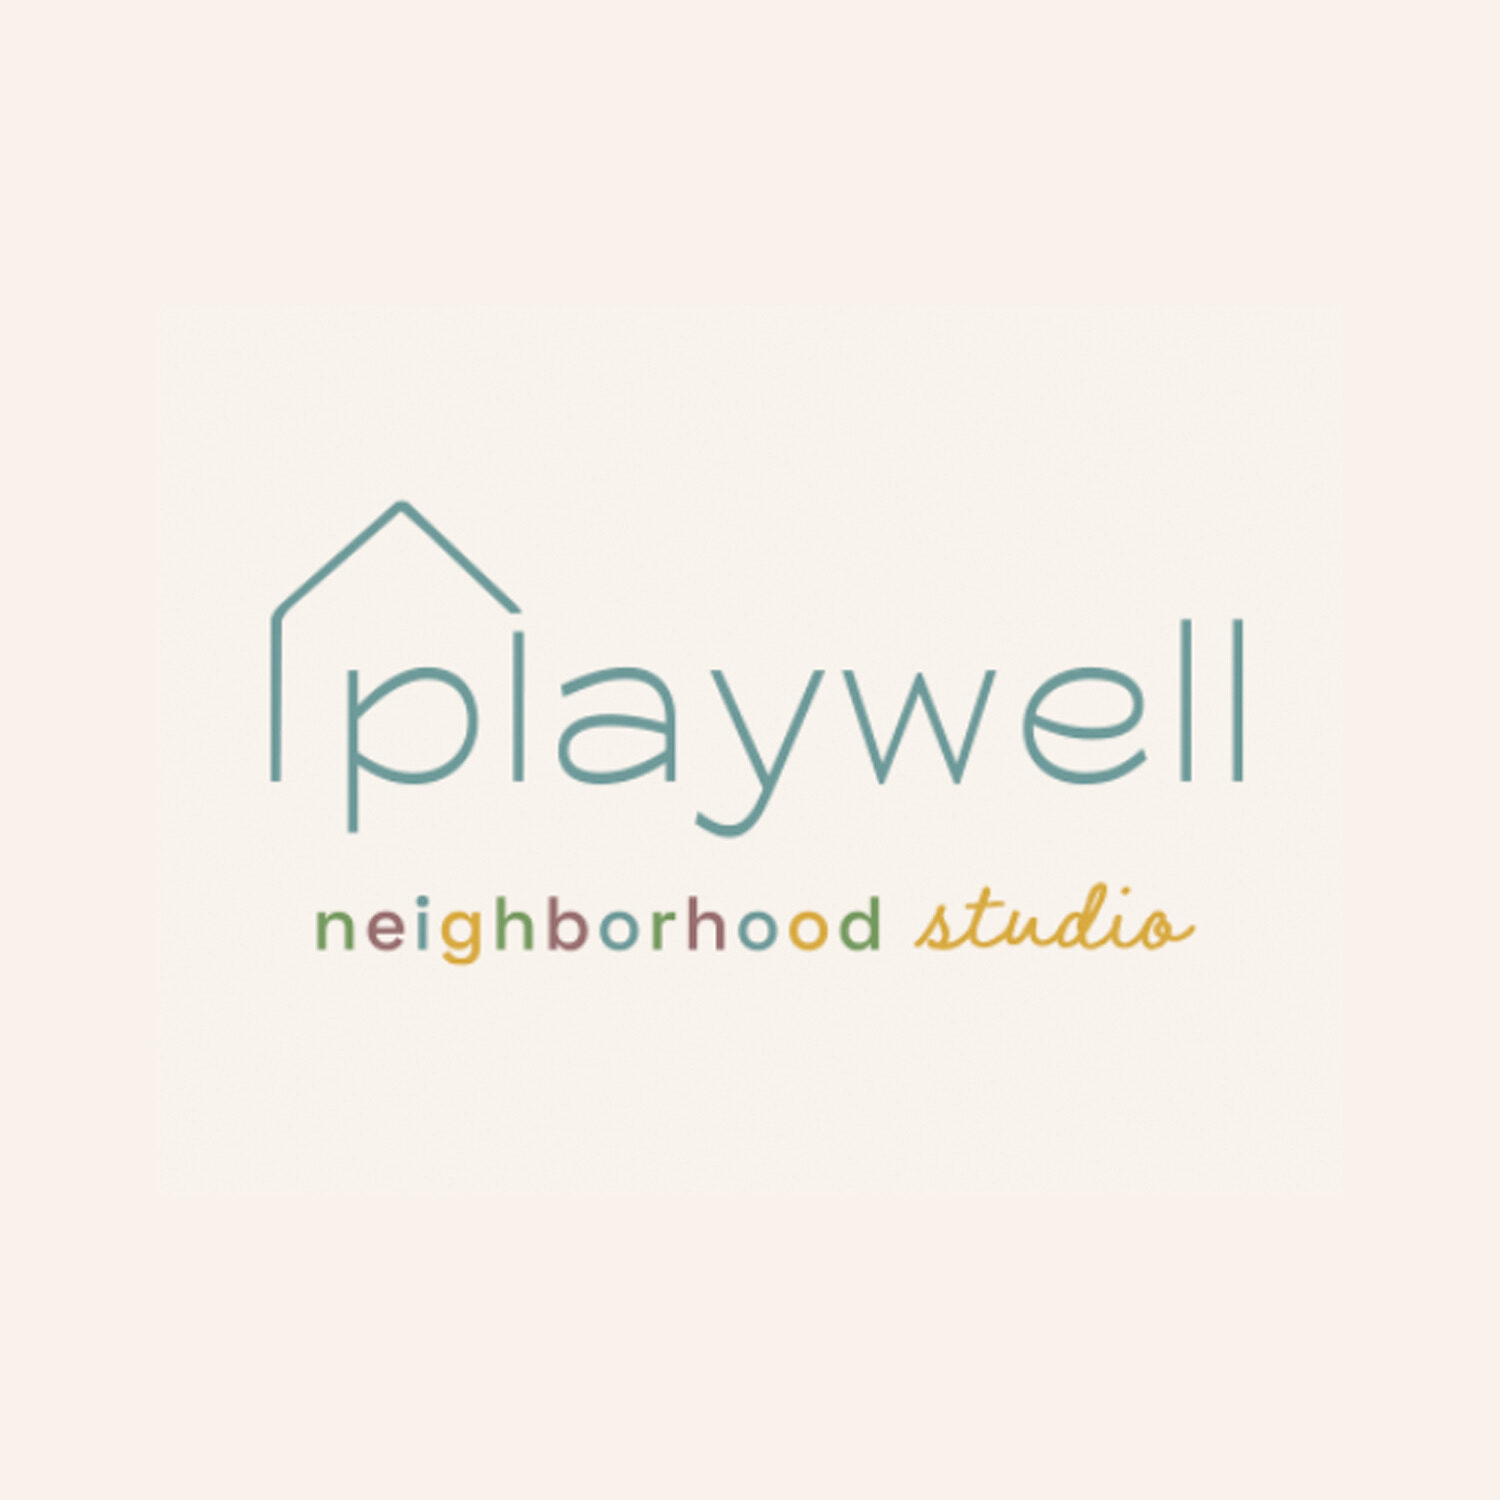 Playwell’s open-concept classroom is designed to engage children’s minds through hands-on exploration that inspires their intrinsic curiosity and desire to learn. It’s meant to be stimulating without being over stimulating. It is both a blank slate and an easel for children’s imaginations to soar, with all the tools and open-ended materials for them to express their ideas.